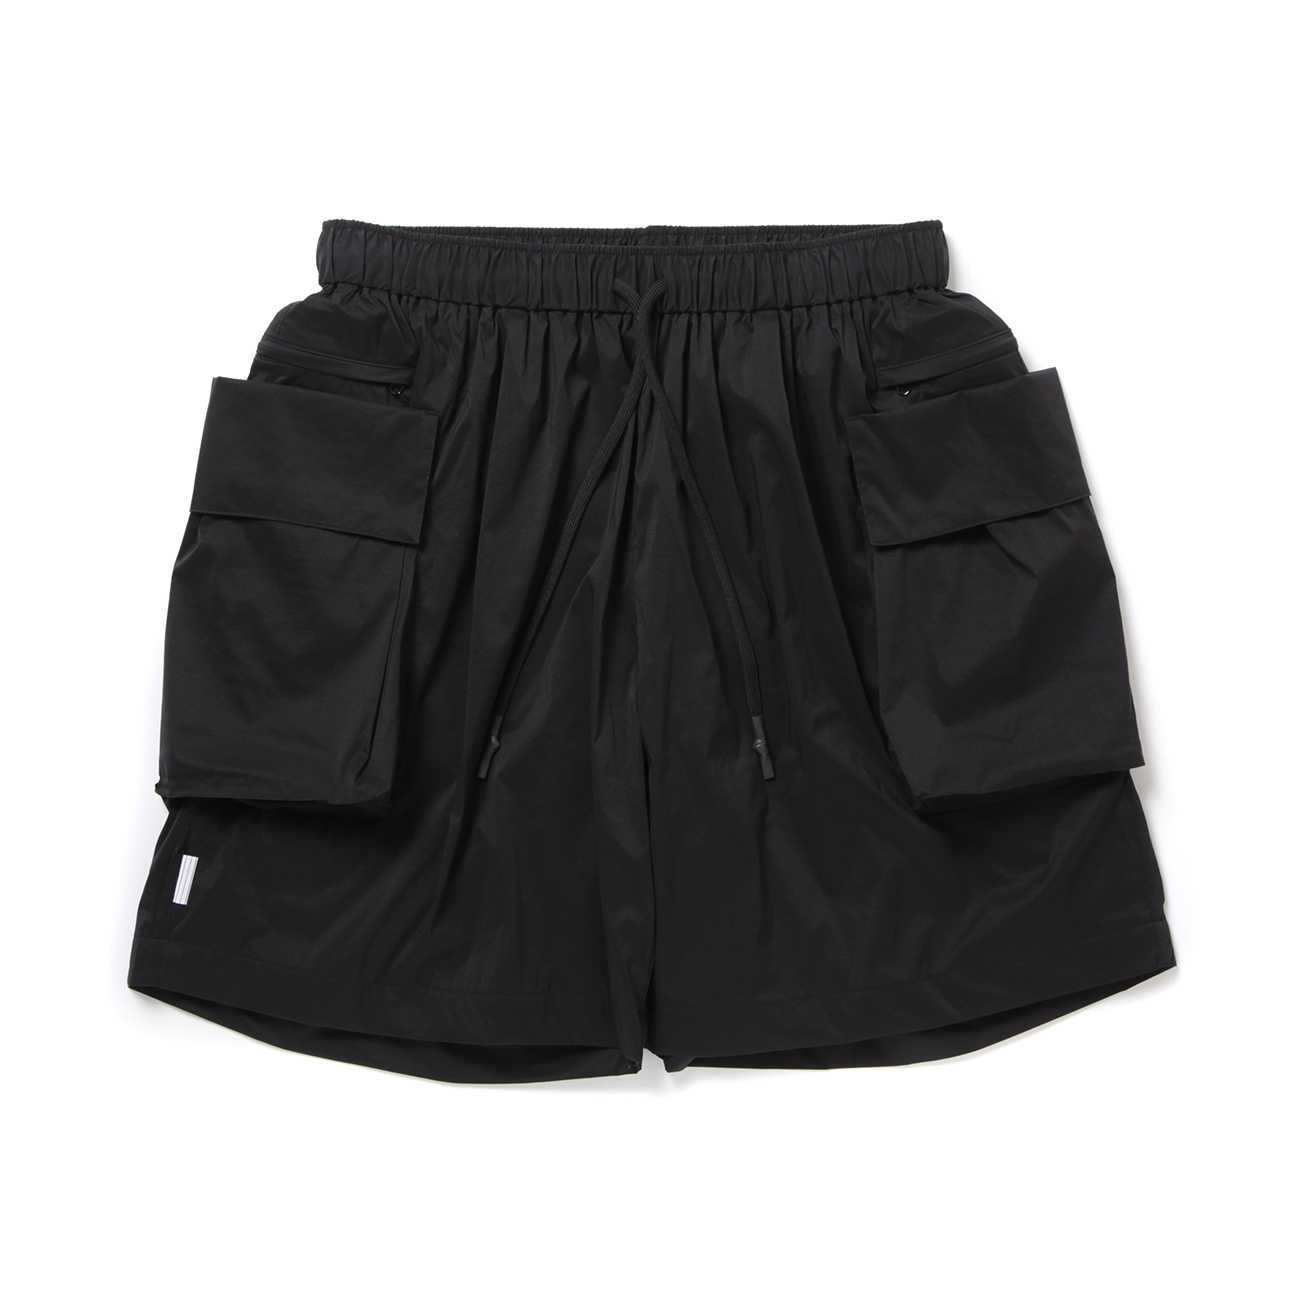 S.F.C Stripes For Creative / エスエフシー | LARGE POCKET SHORTS - Black | 通販 -  正規取扱店 | COLLECT STORE / コレクトストア